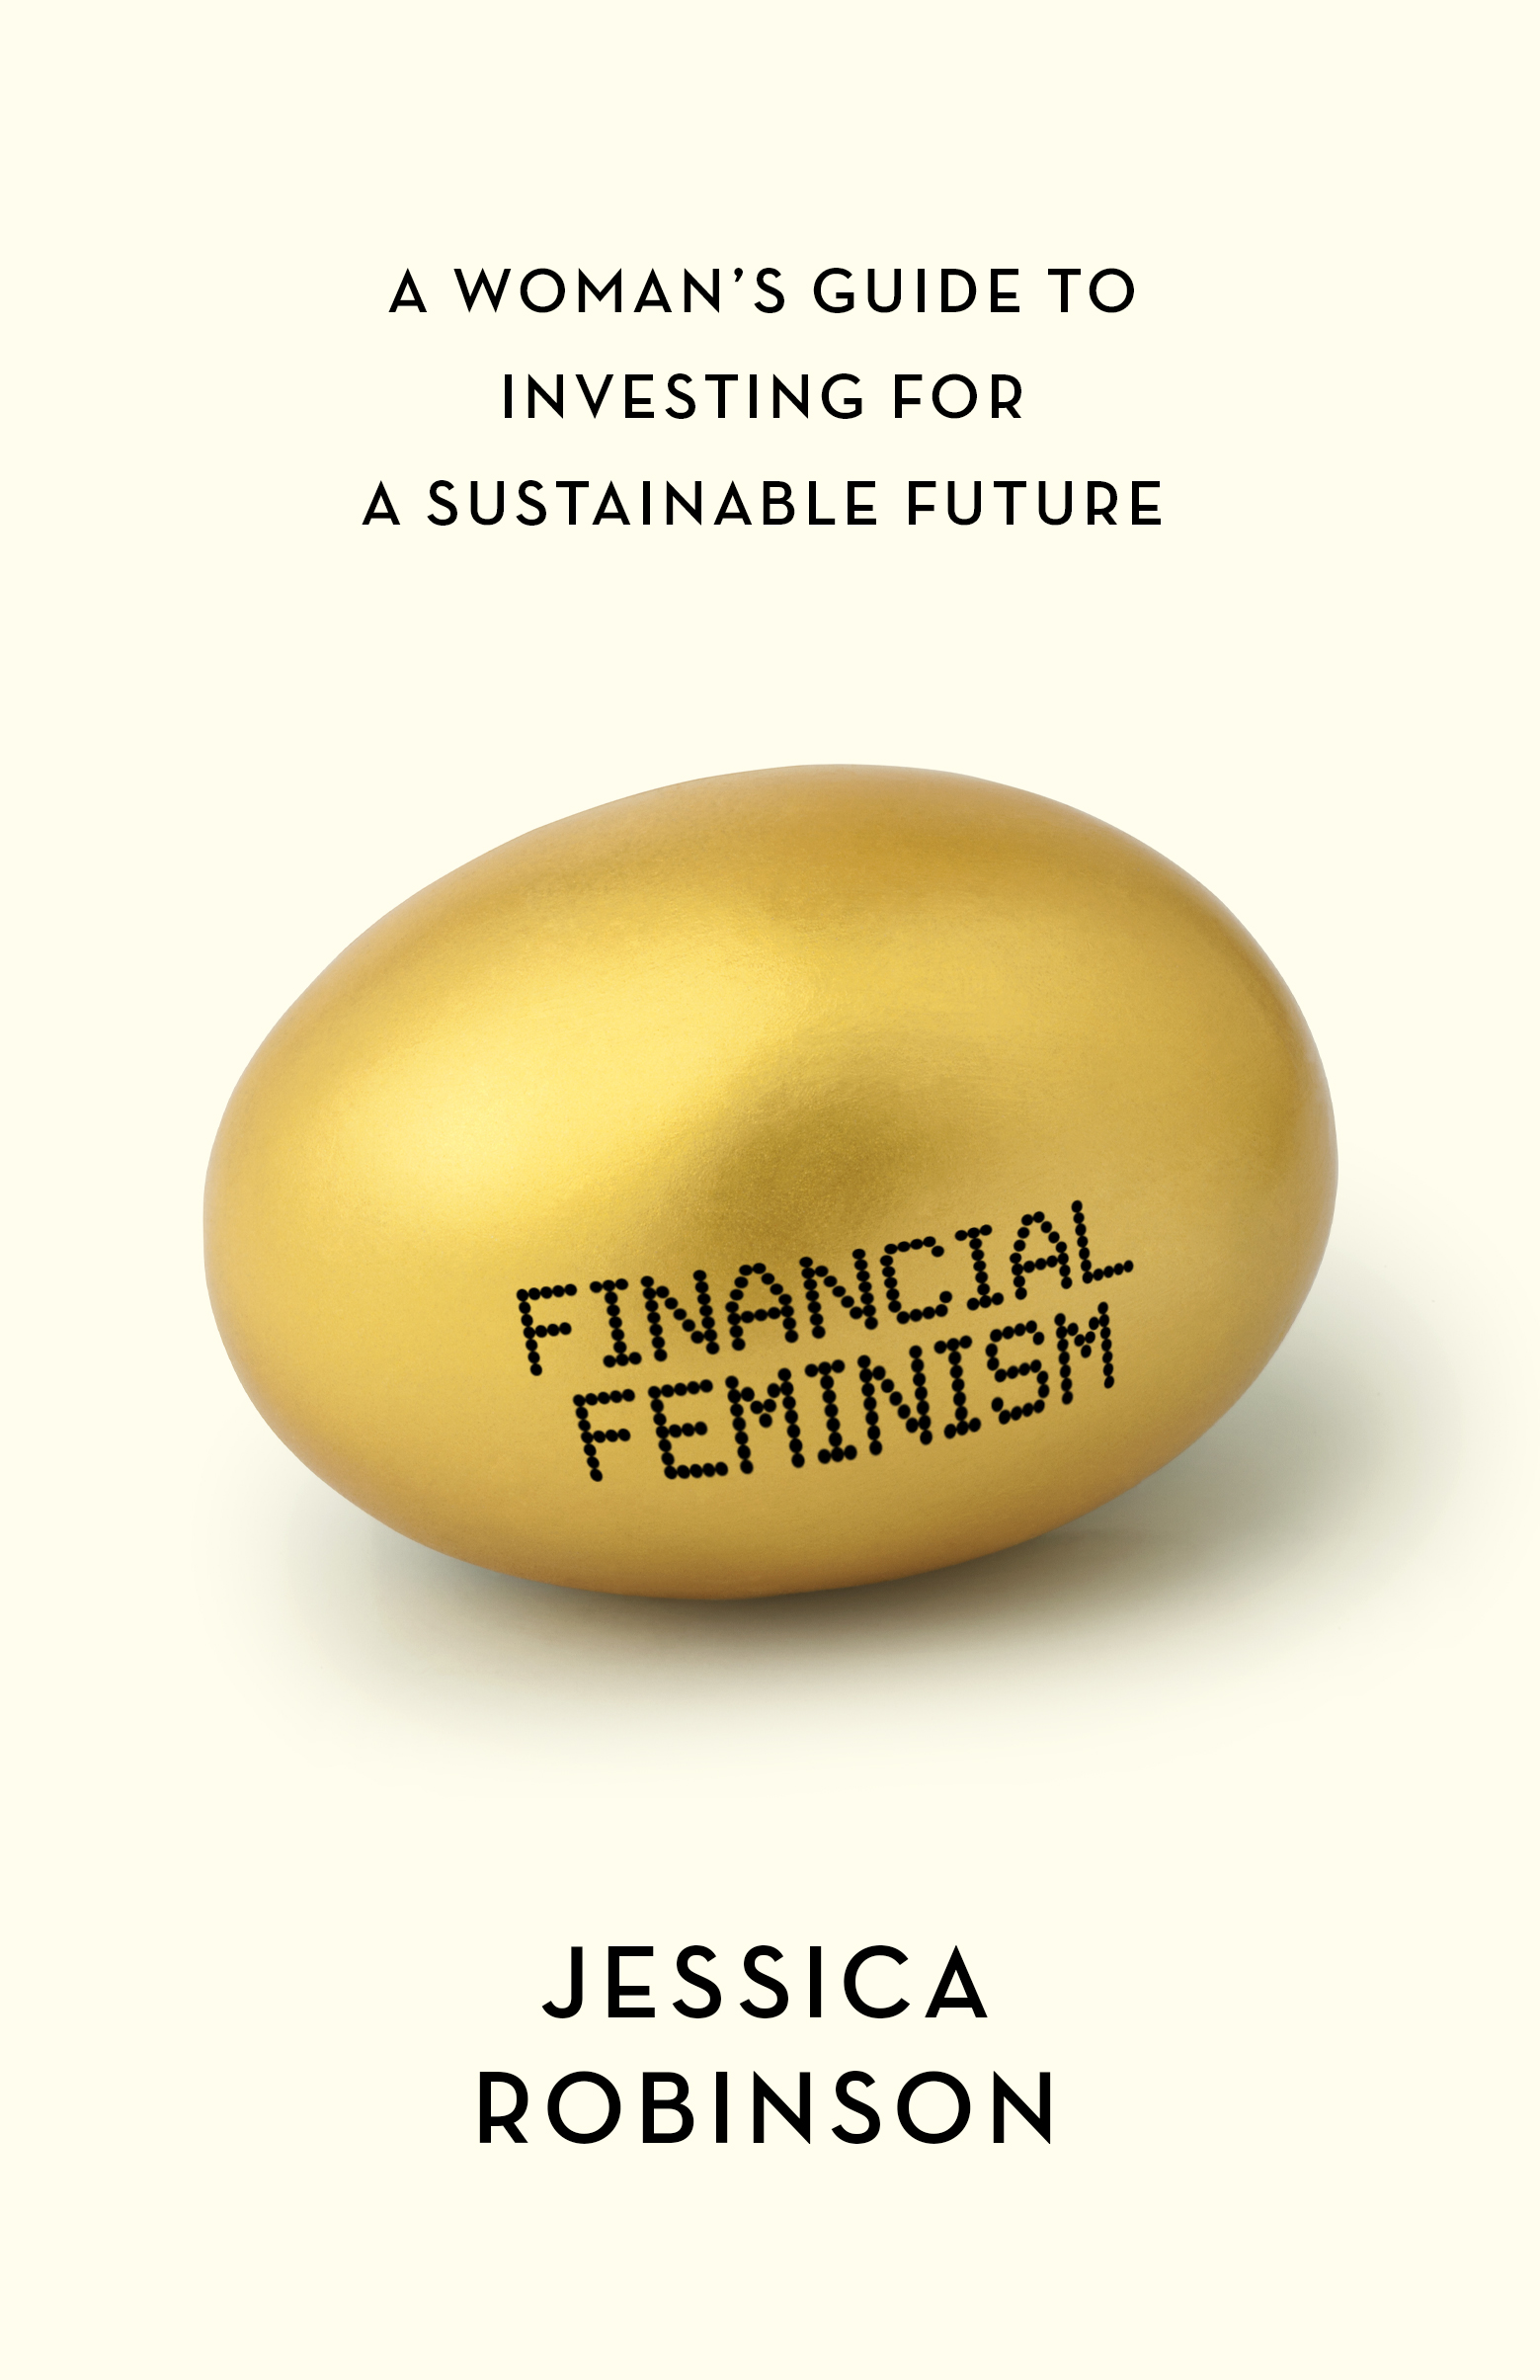 sustainable-investing-jessica-robinson